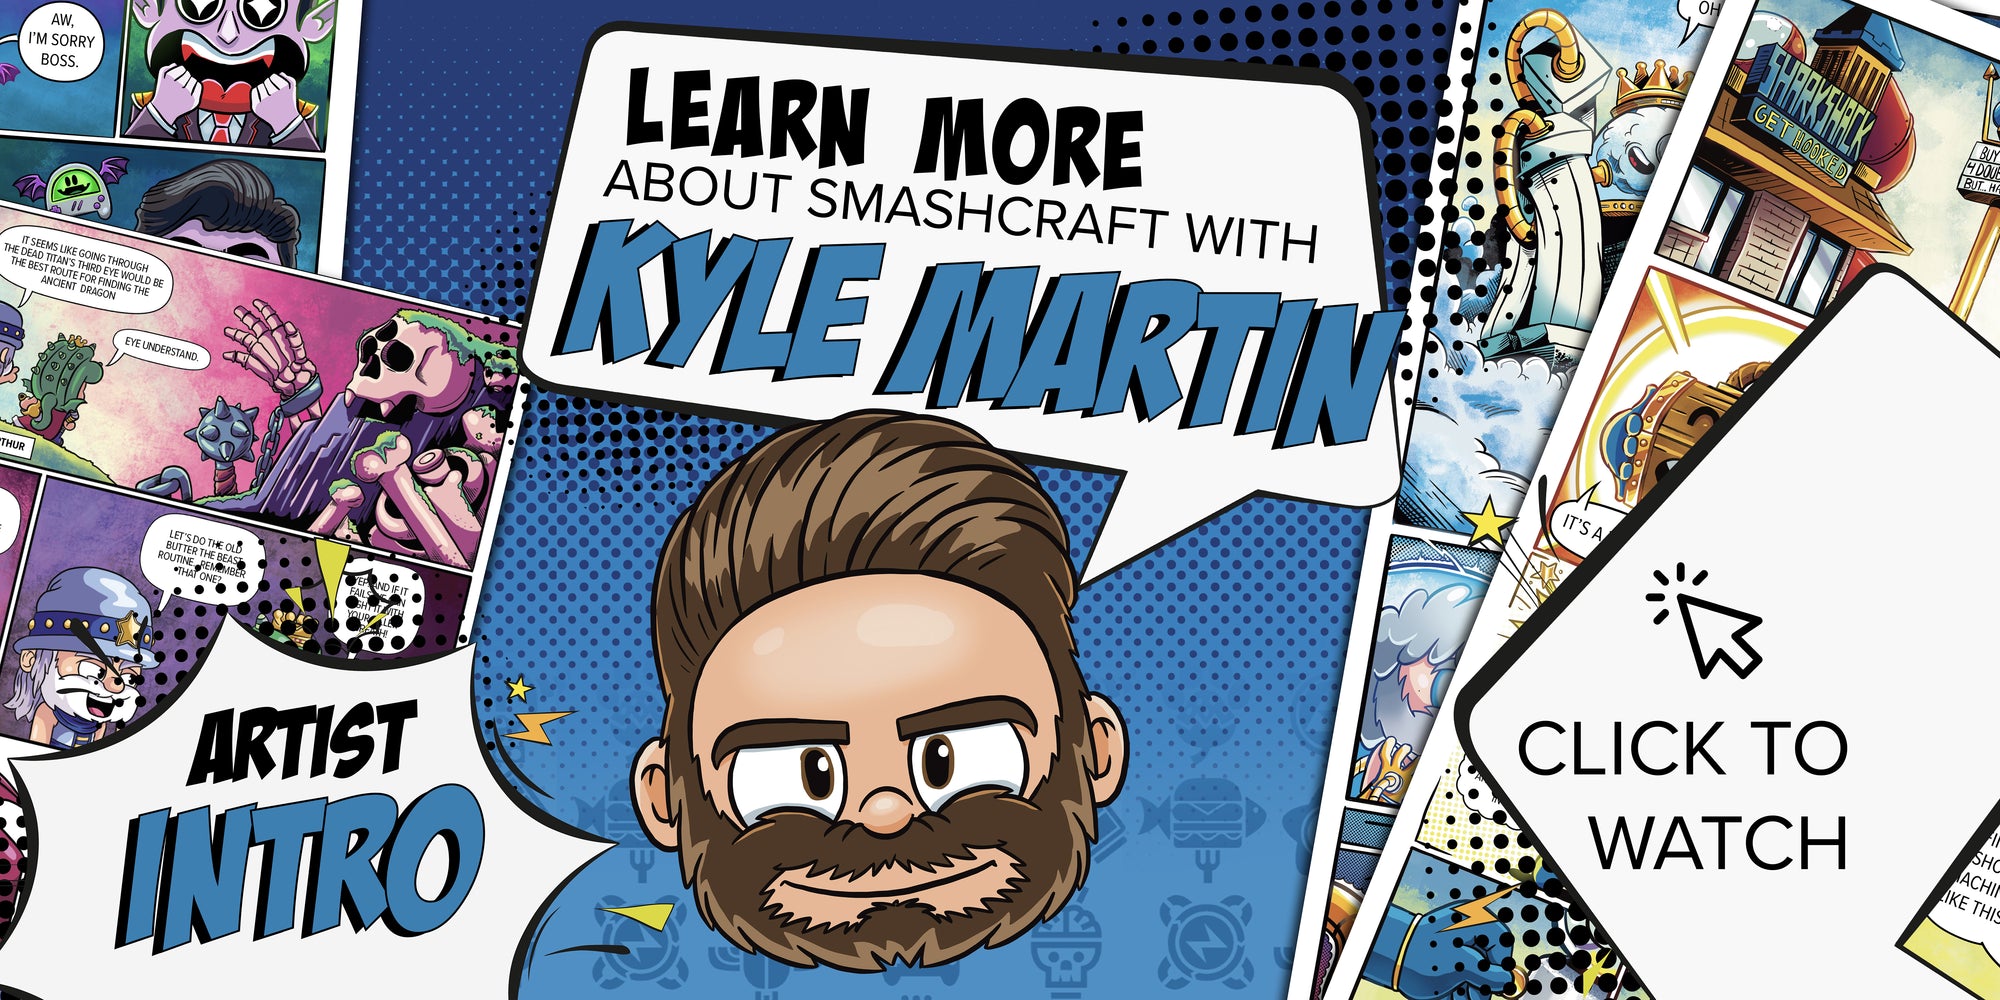 Text "learn more about SMASHCRAFT with Kyle Martin" and text "artist intro, click to watch" Kyle Martins Chibi with comics in background